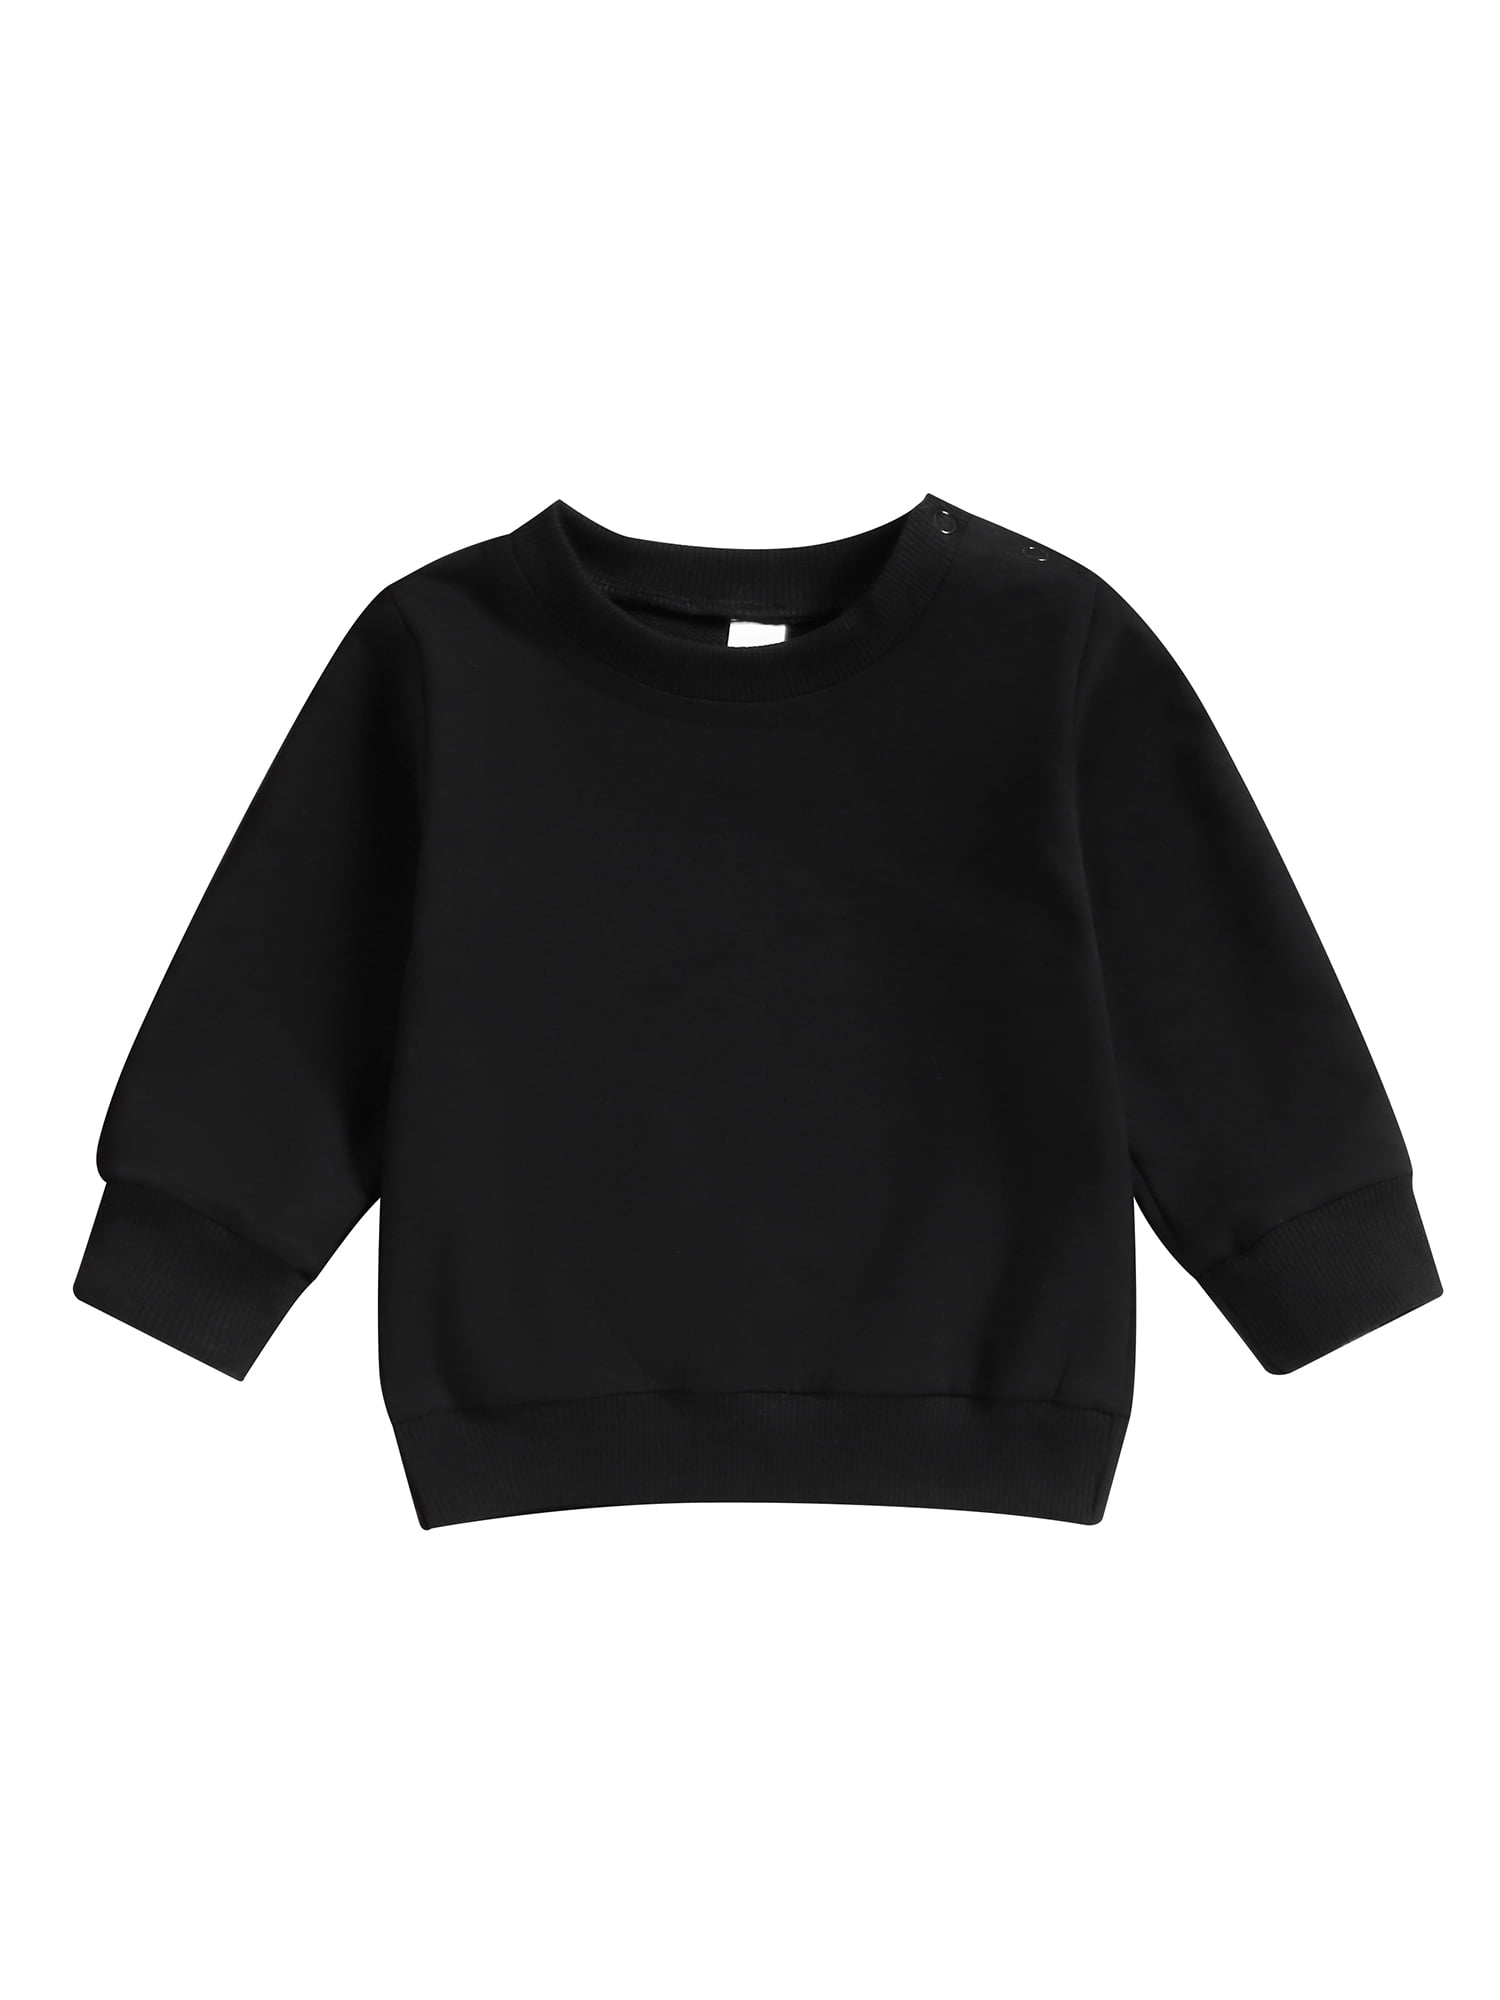 Qtinghua Infant Toddler Baby Boy Sweatshirt Long Sleeve Crewneck Solid  Color Pullover Tops Fall Clothes Black 12-18 Months